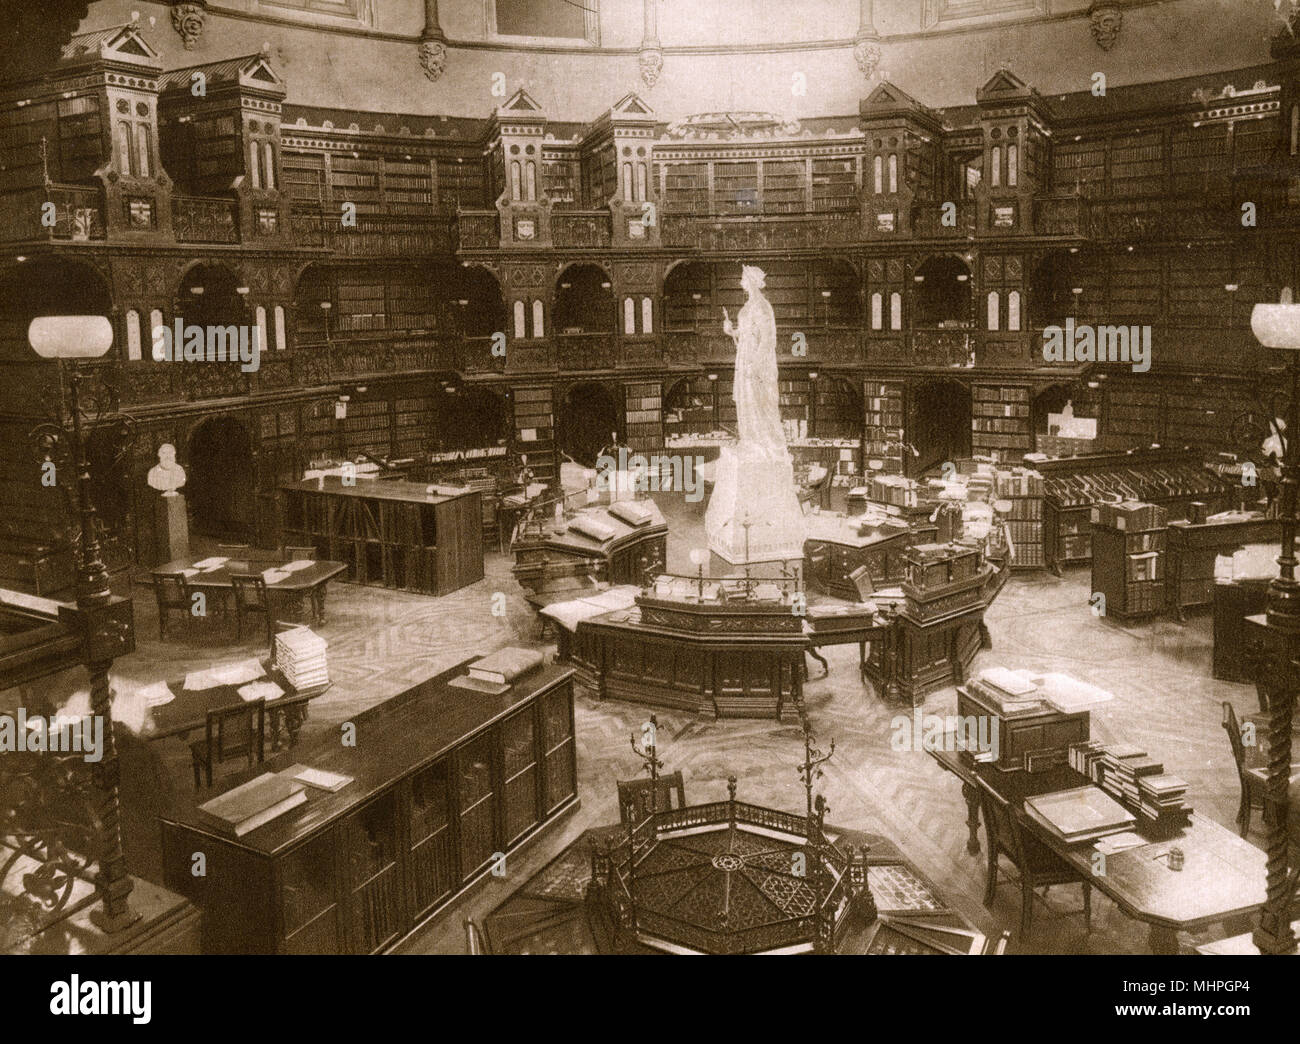 Interior of the Parliament Library, Parliament Hill, Ottawa, Ontario, Canada, built in the style of a chapter house and inspired by the British Museum Reading Room.       Date: circa 1910 Stock Photo